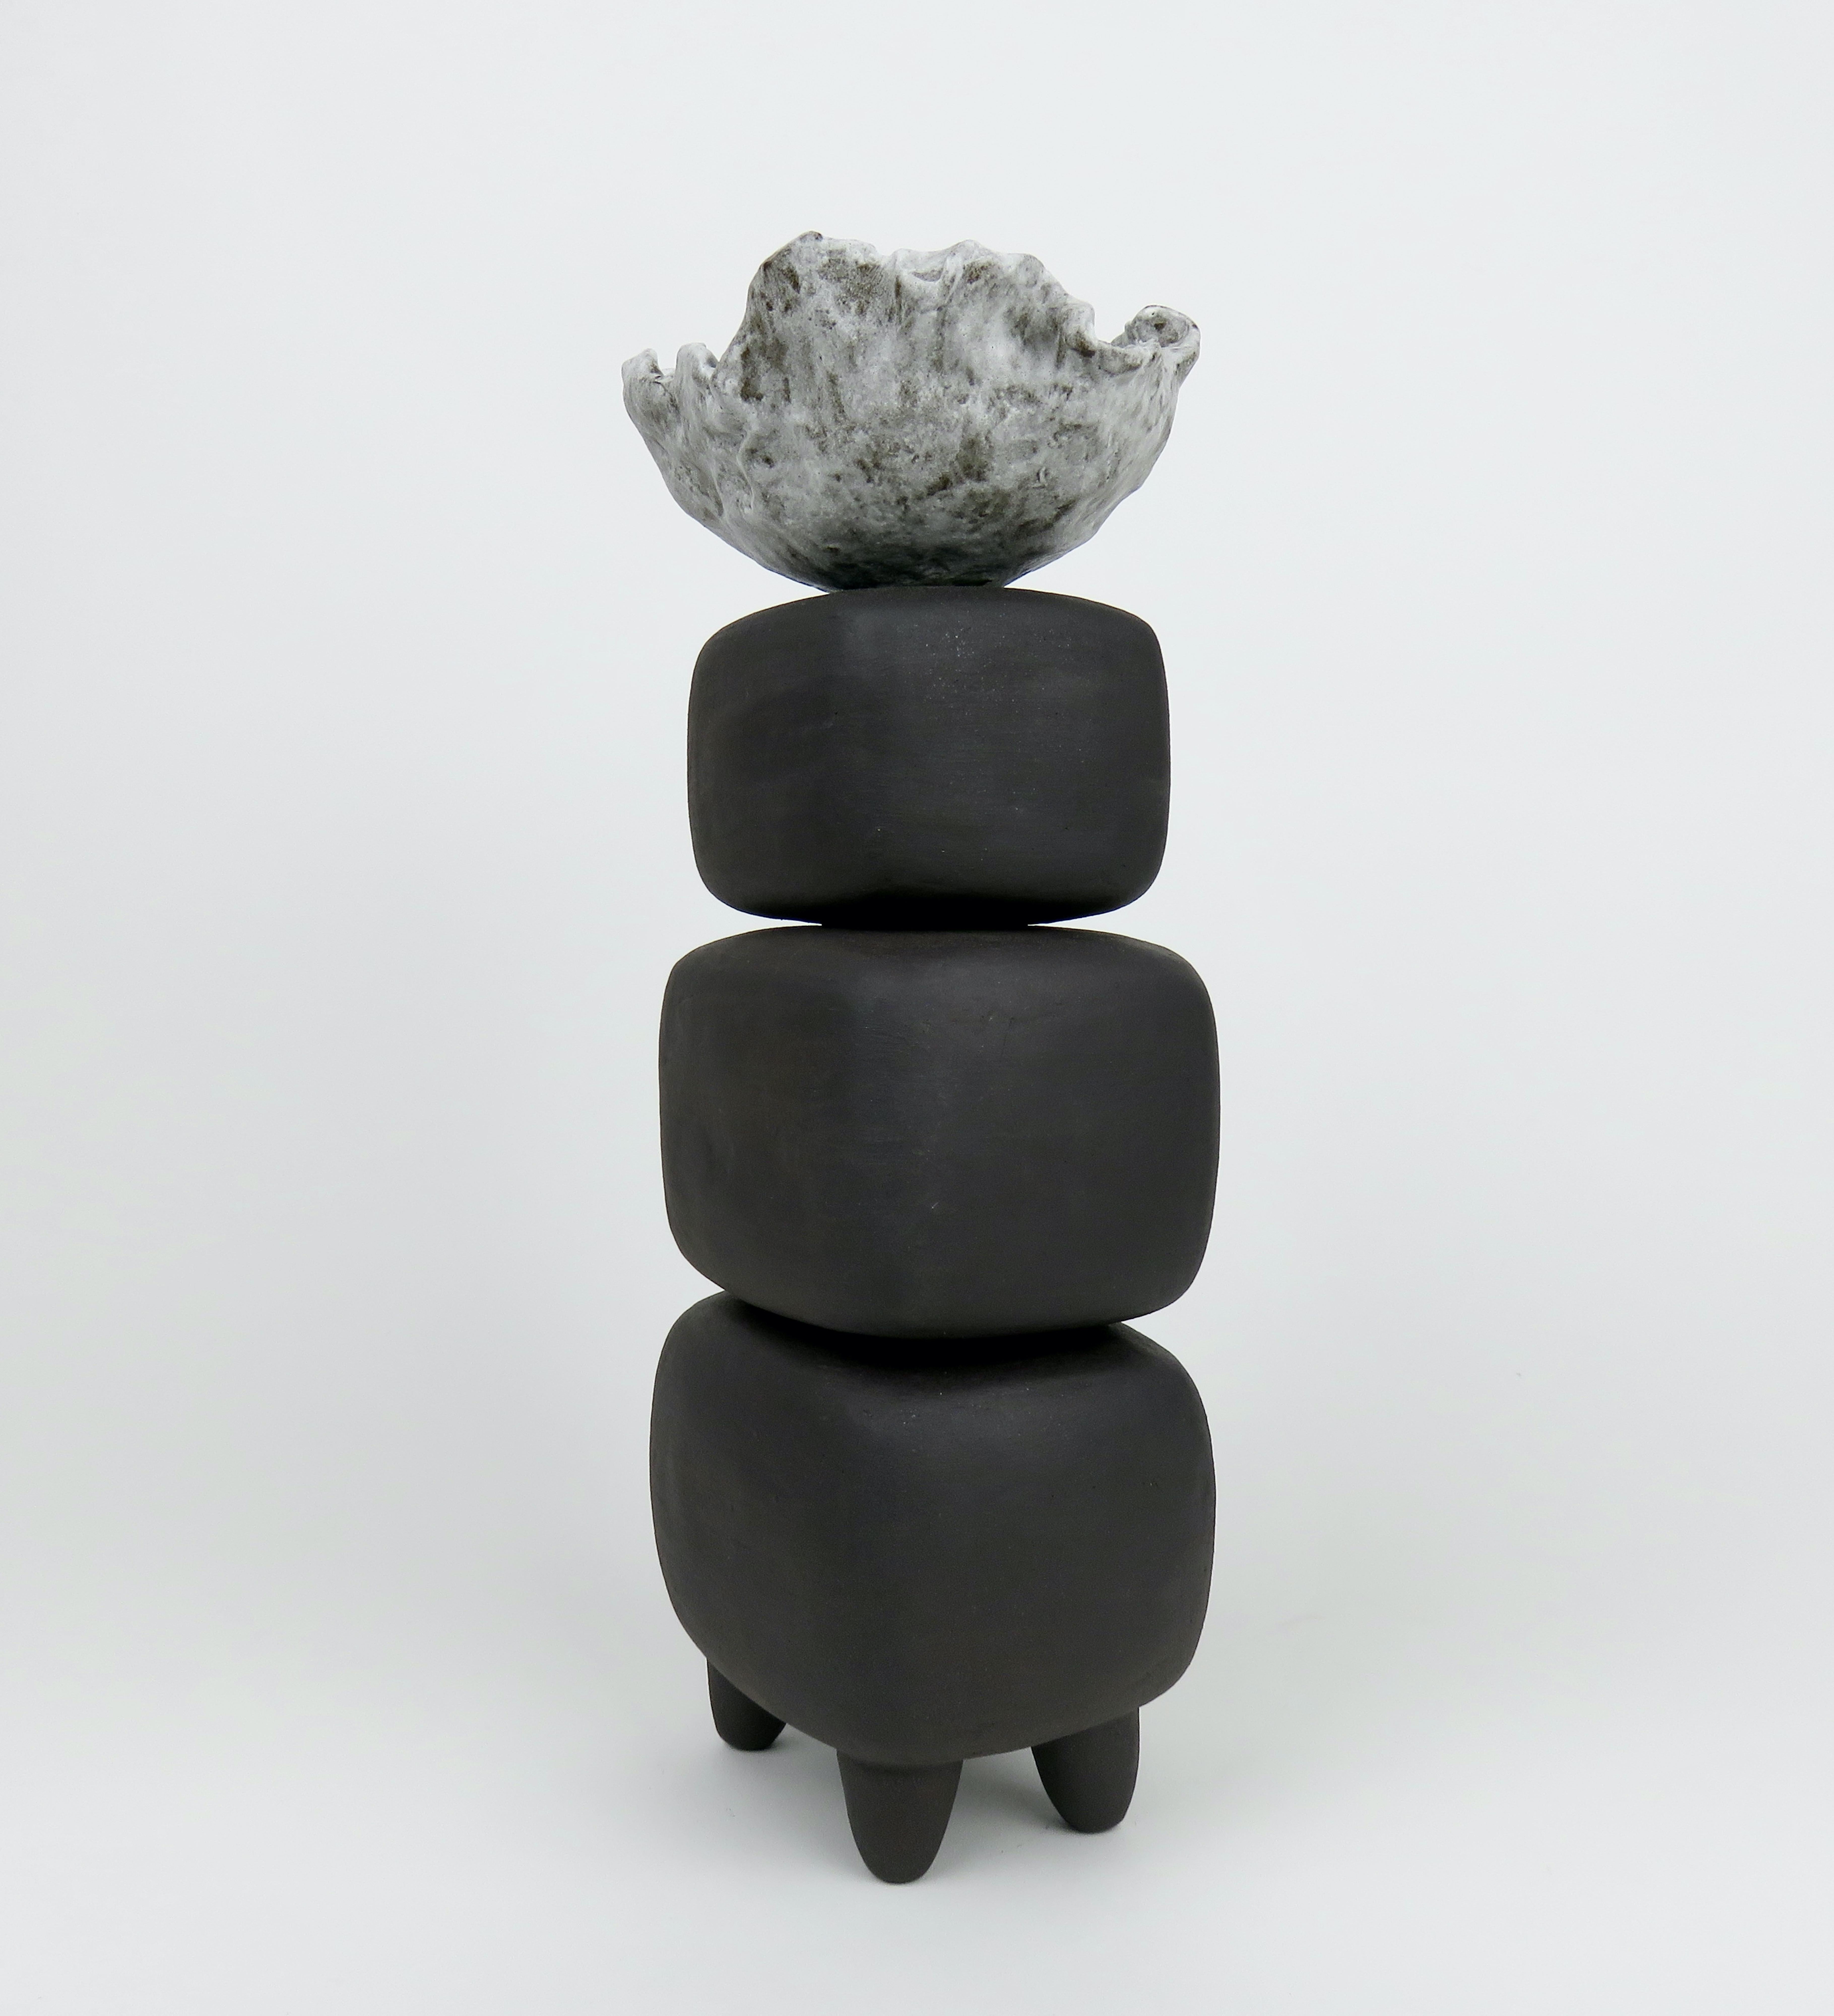 This hand built ceramic sculpture made of dark brown clay consists of three soft rectangular forms stacked on 4 distinct feet. It is topped with an organic, crimped bowl-like form in off-white glaze. The brown cubes are hollow and coated with a deep